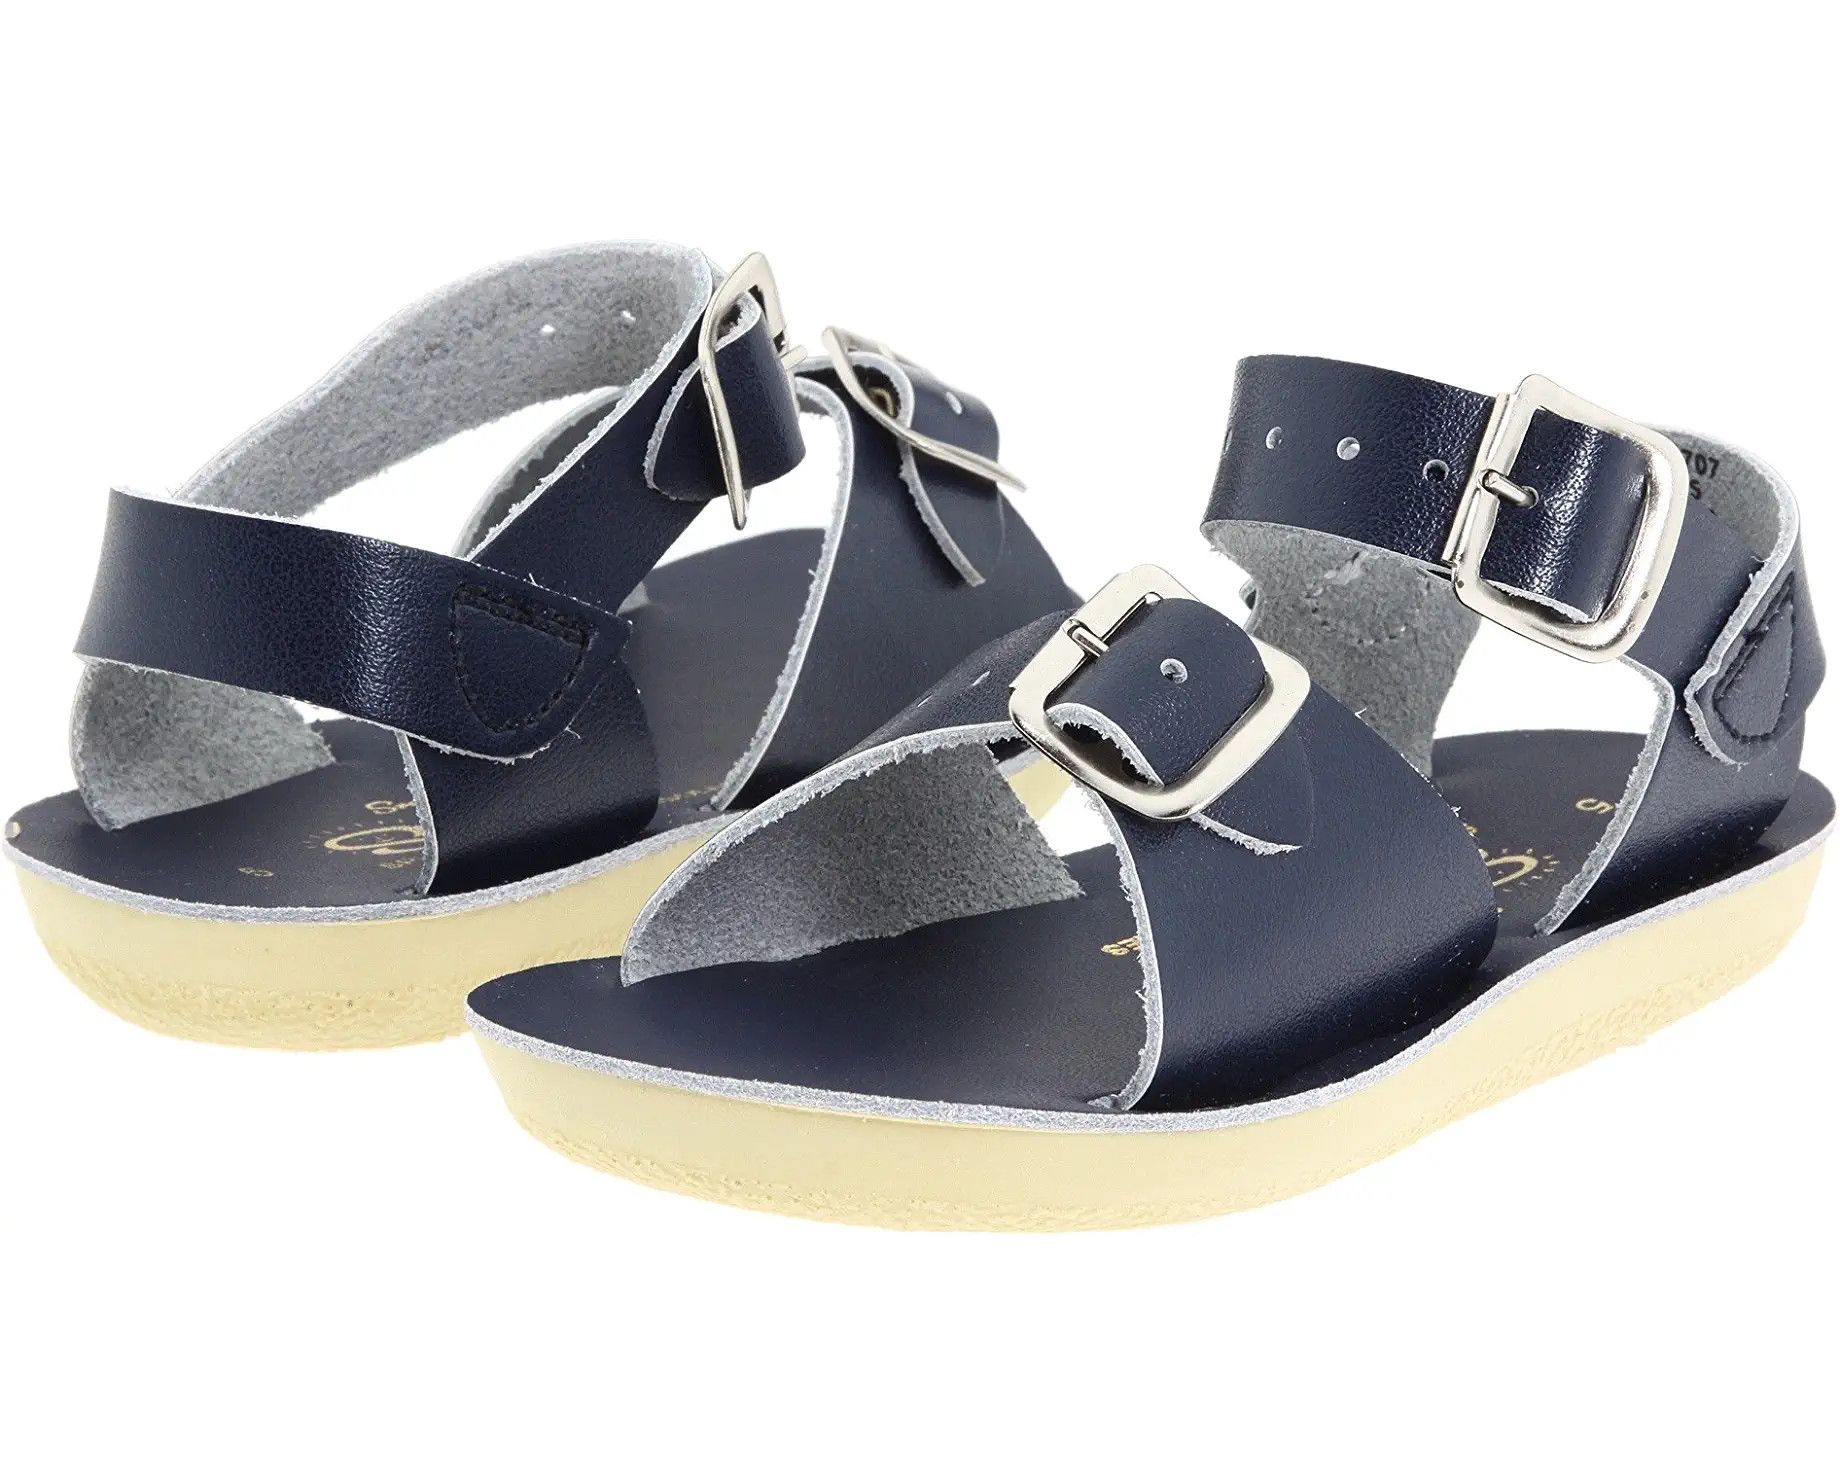 Salt Water Sandal by Hoy Shoes | Zappos